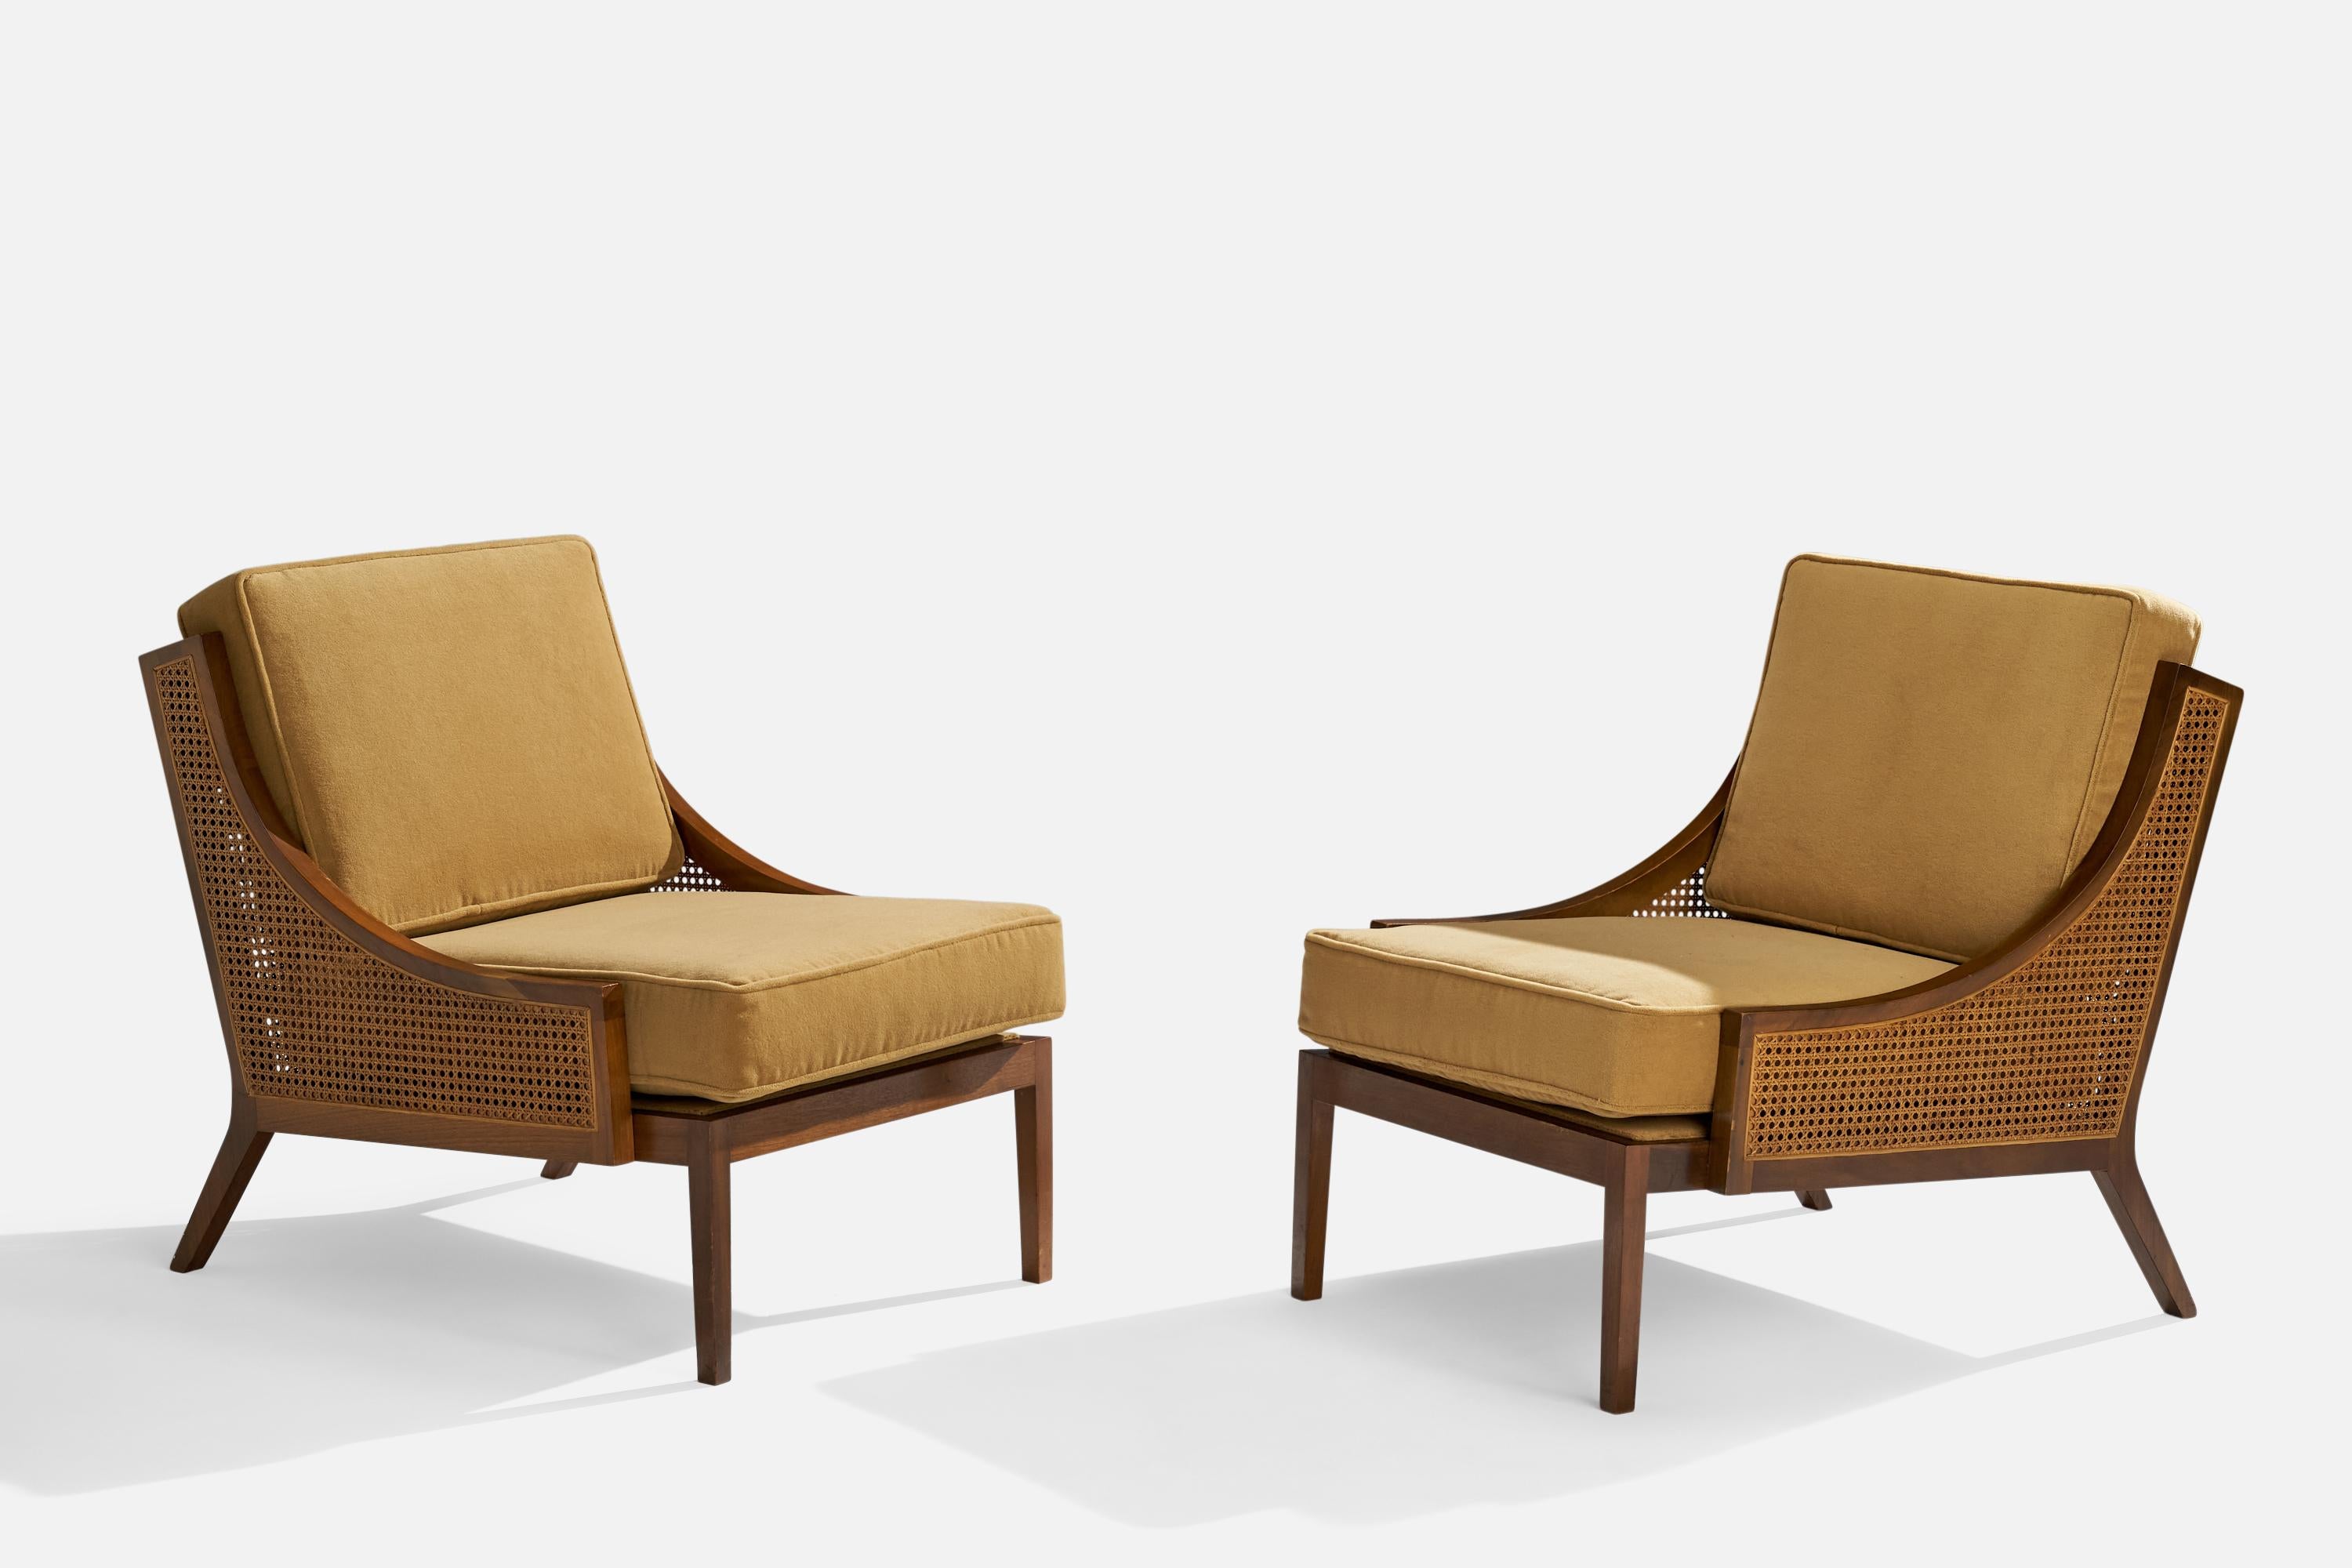 A pair walnut, beige yellow velvet and rattan slipper lounge chairs designed and produced in the US, 1950s.

Seat height 16.5”.